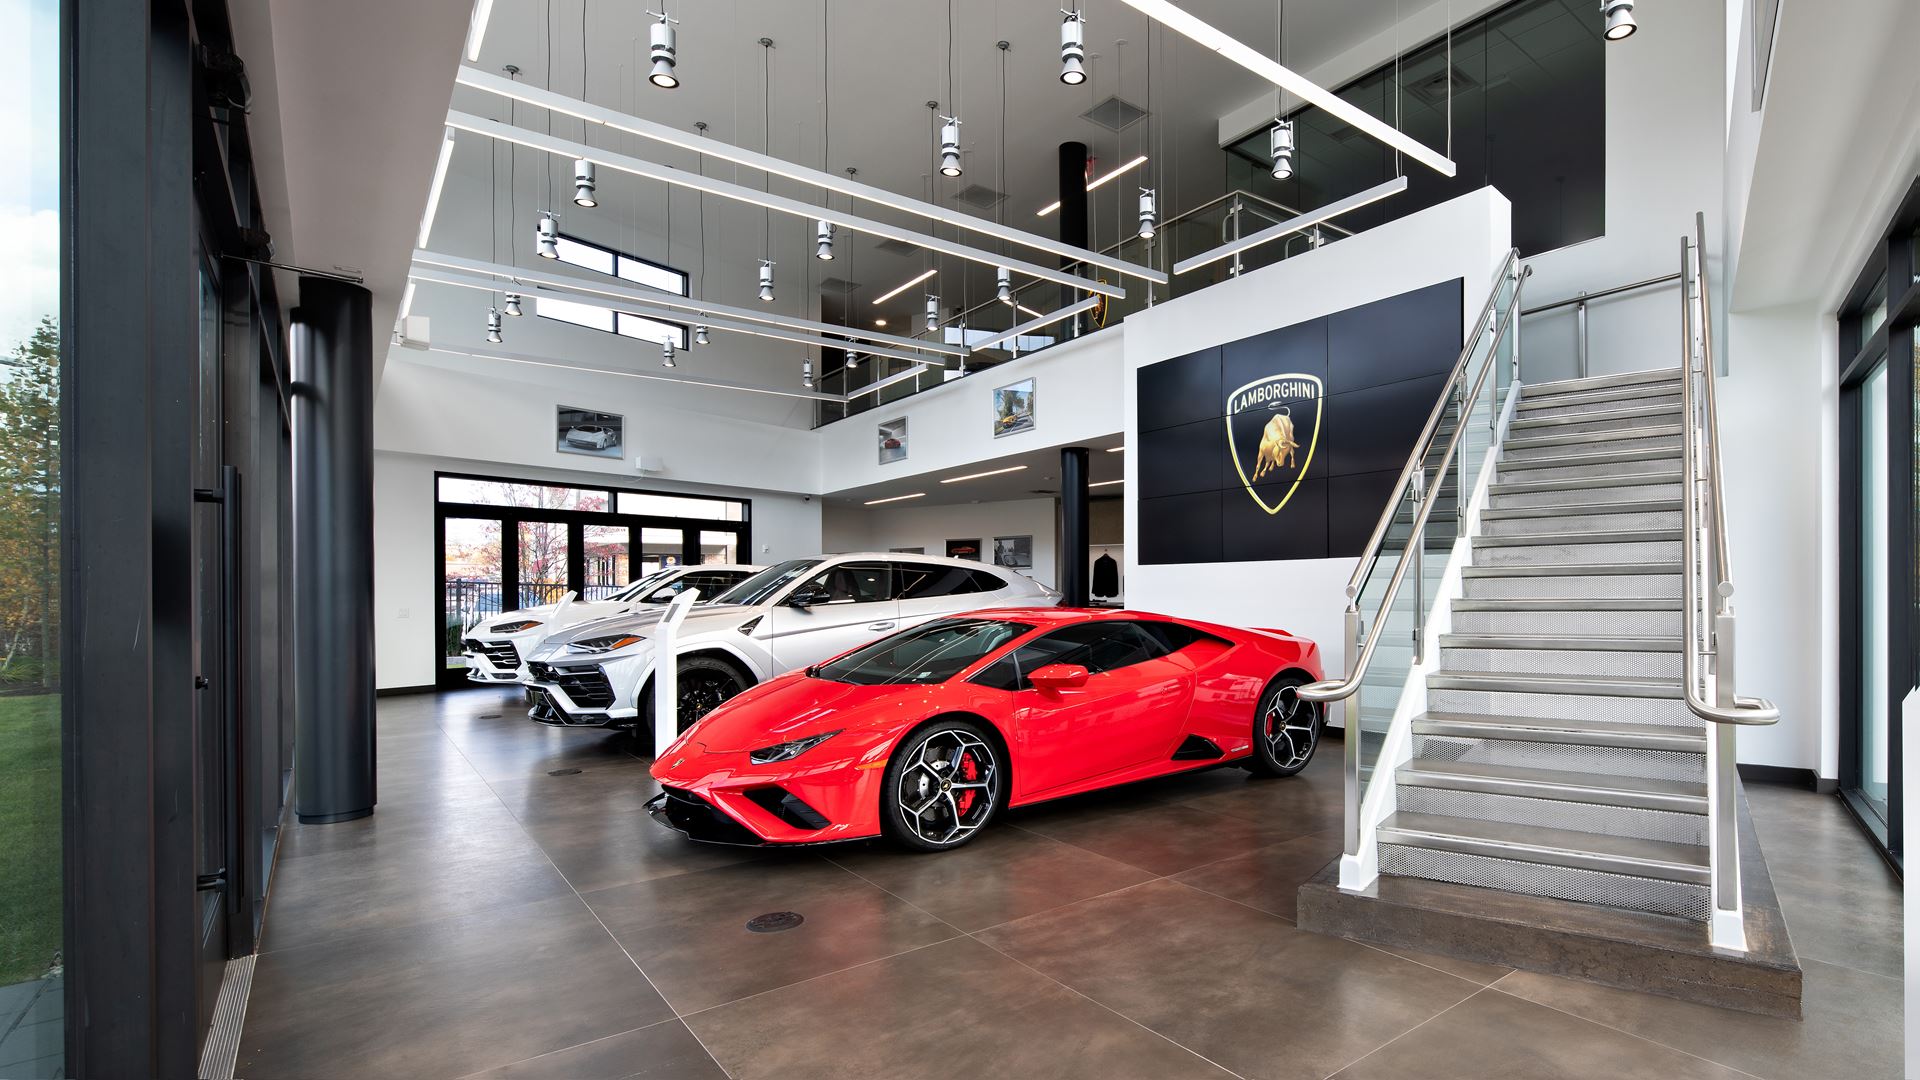 Lamborghini Expands Retail Footprint in US with New Showroom in Greenwich, CT - Image 4